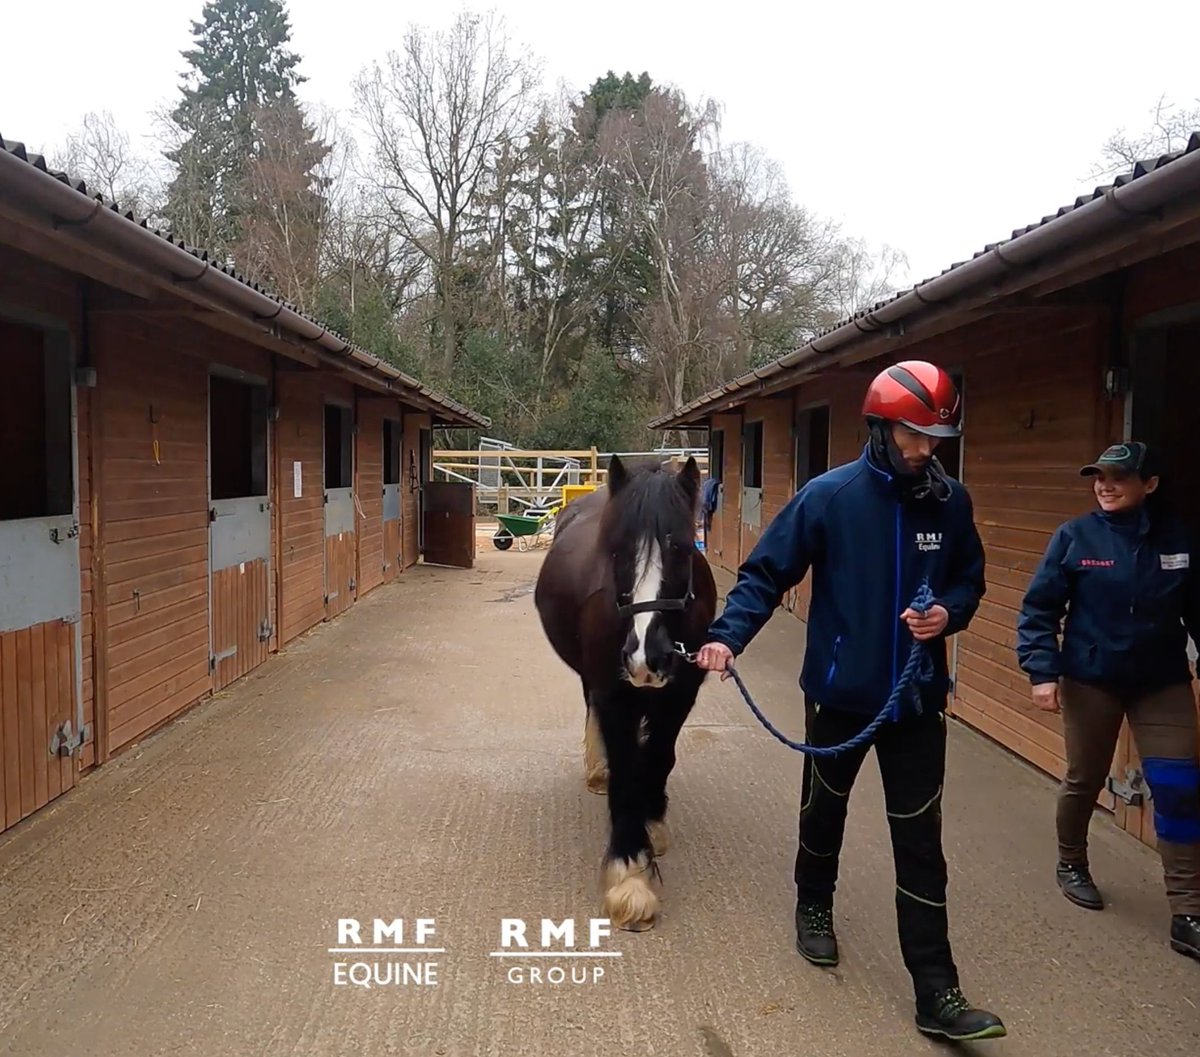 ✨ Learn with ease and gain new experiences. RMF have FREE training courses for anyone interested in horses and caring for horses. Call 0121 440 7970 or email enquiries@rmftraining.co.uk for more details and enrolment. #HorseLife #WestMidlands